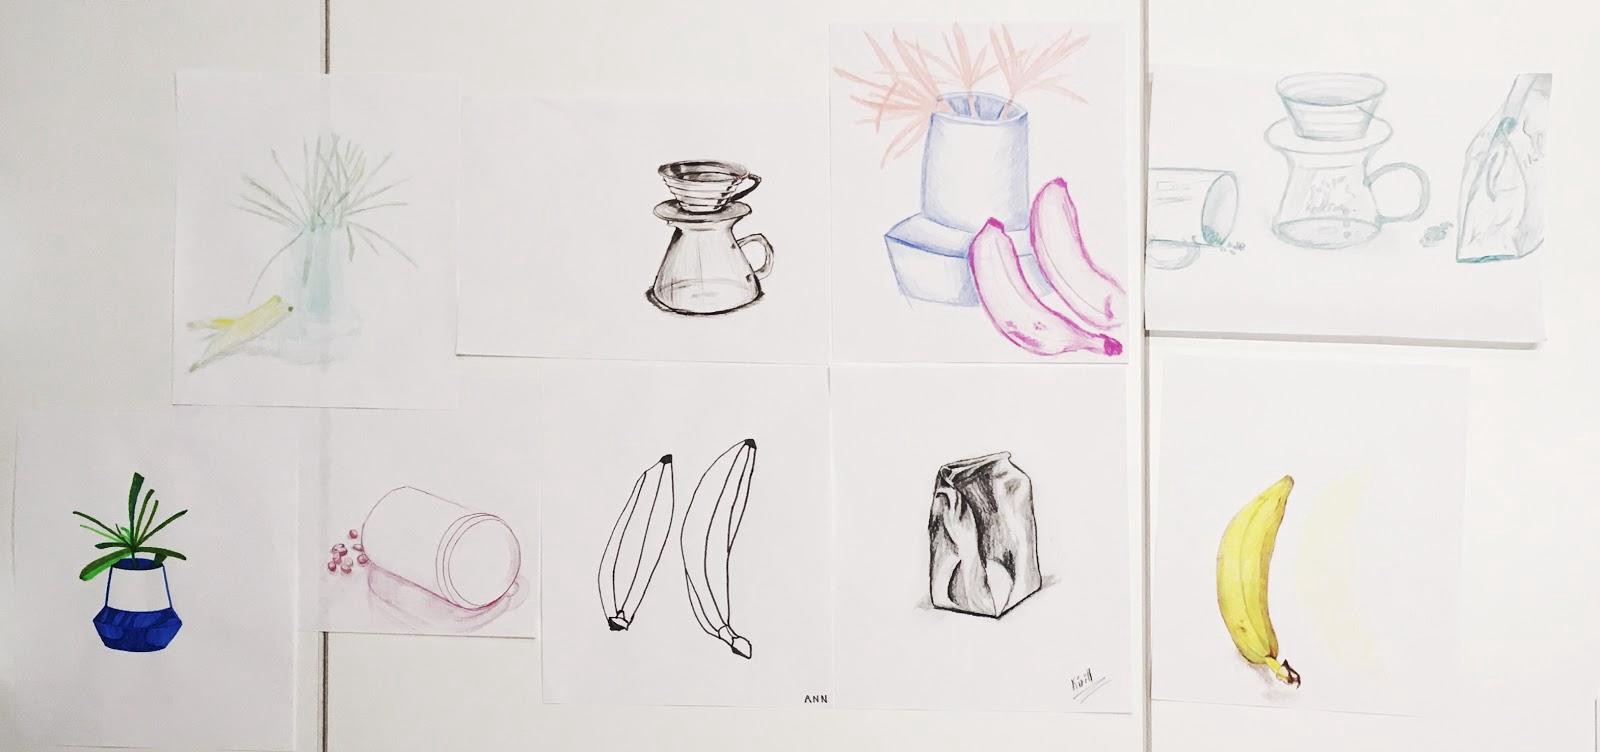 Selection of still-life sketches taped next to each other on an office whiteboard.